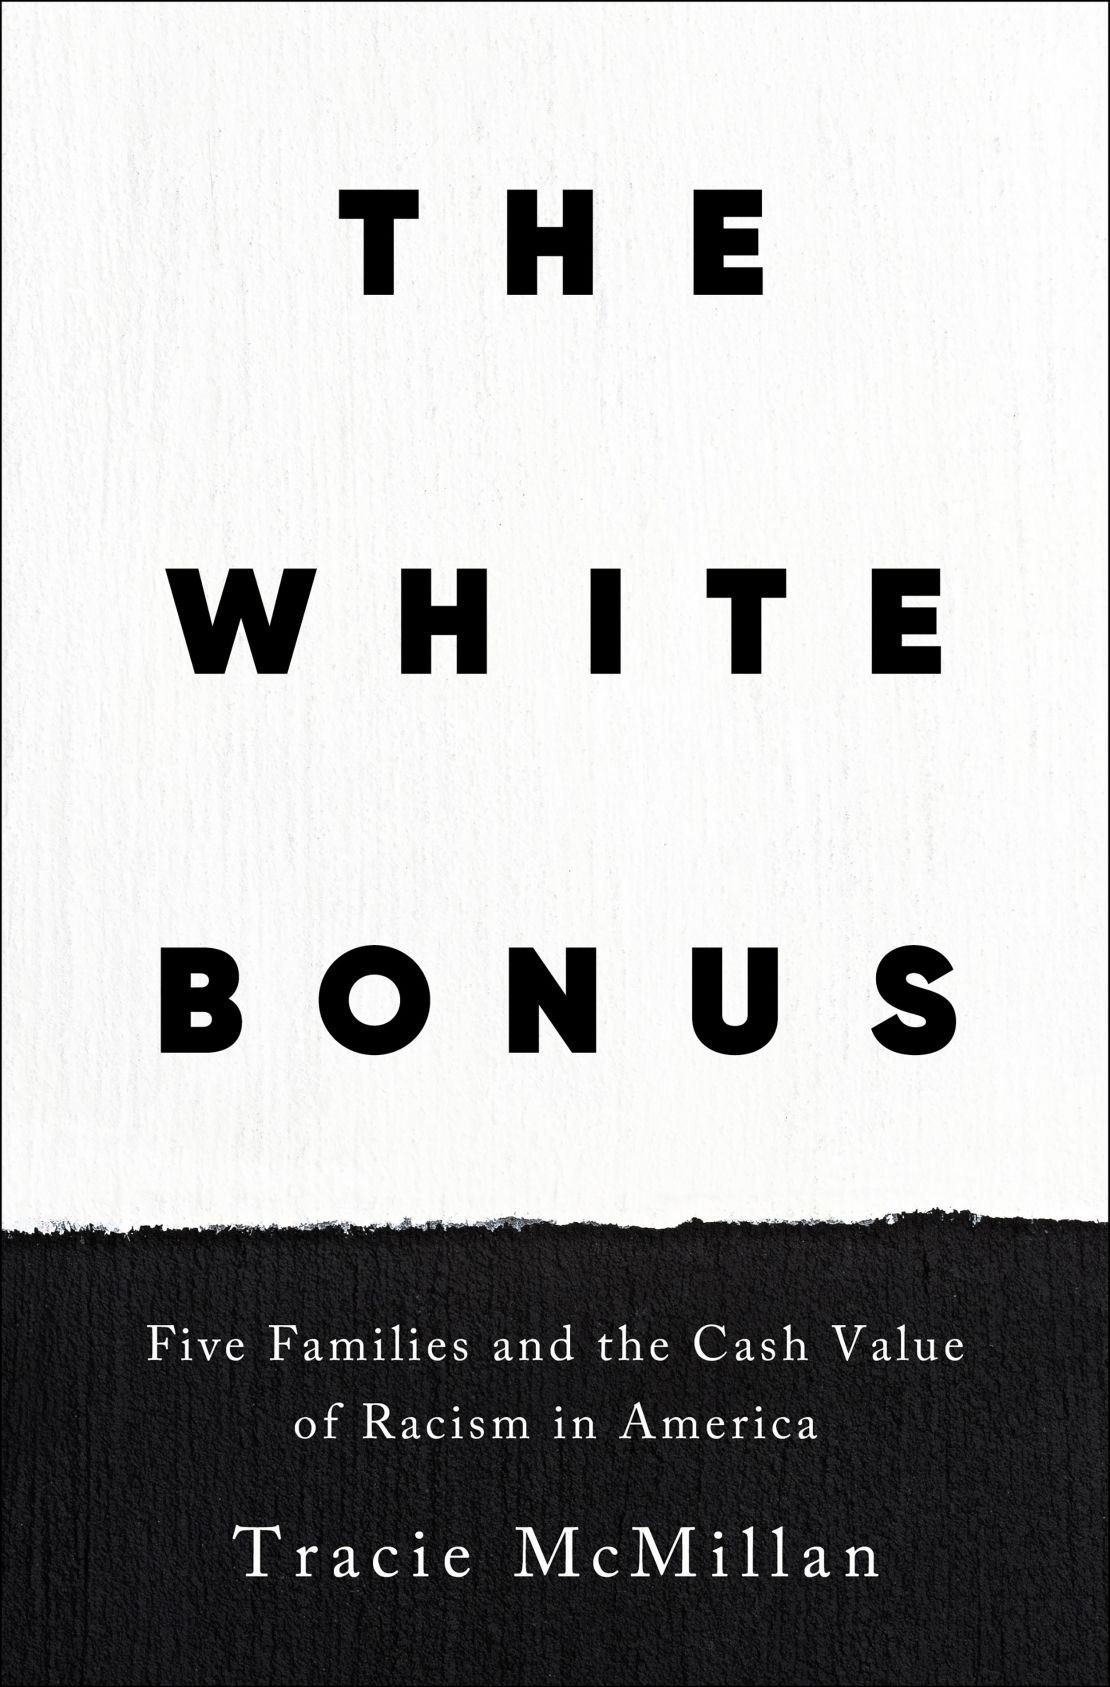 In "The White Bonus," McMillan traces just how much of her family’s modest wealth can be attributed to discriminatory policies and practices.